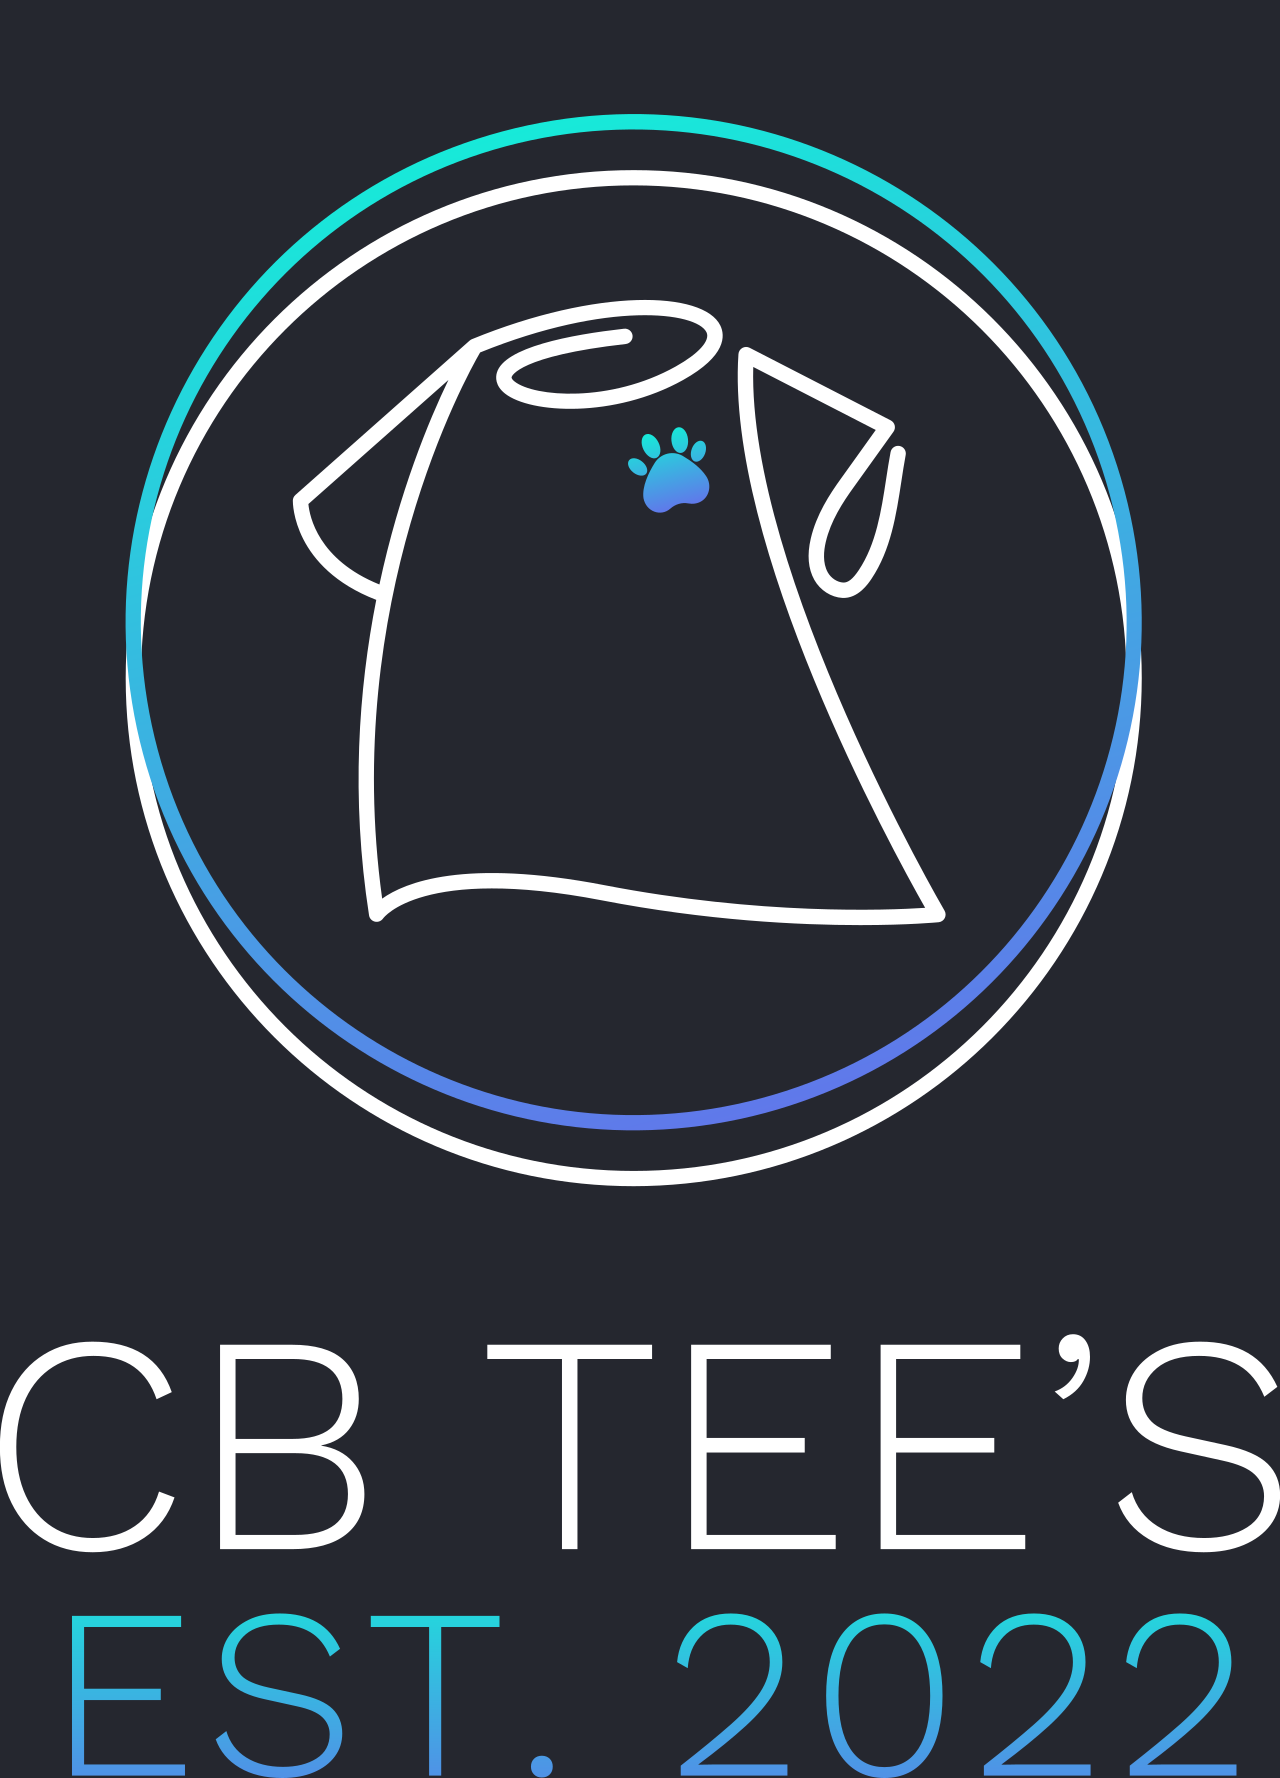 CB TEE’S's web page